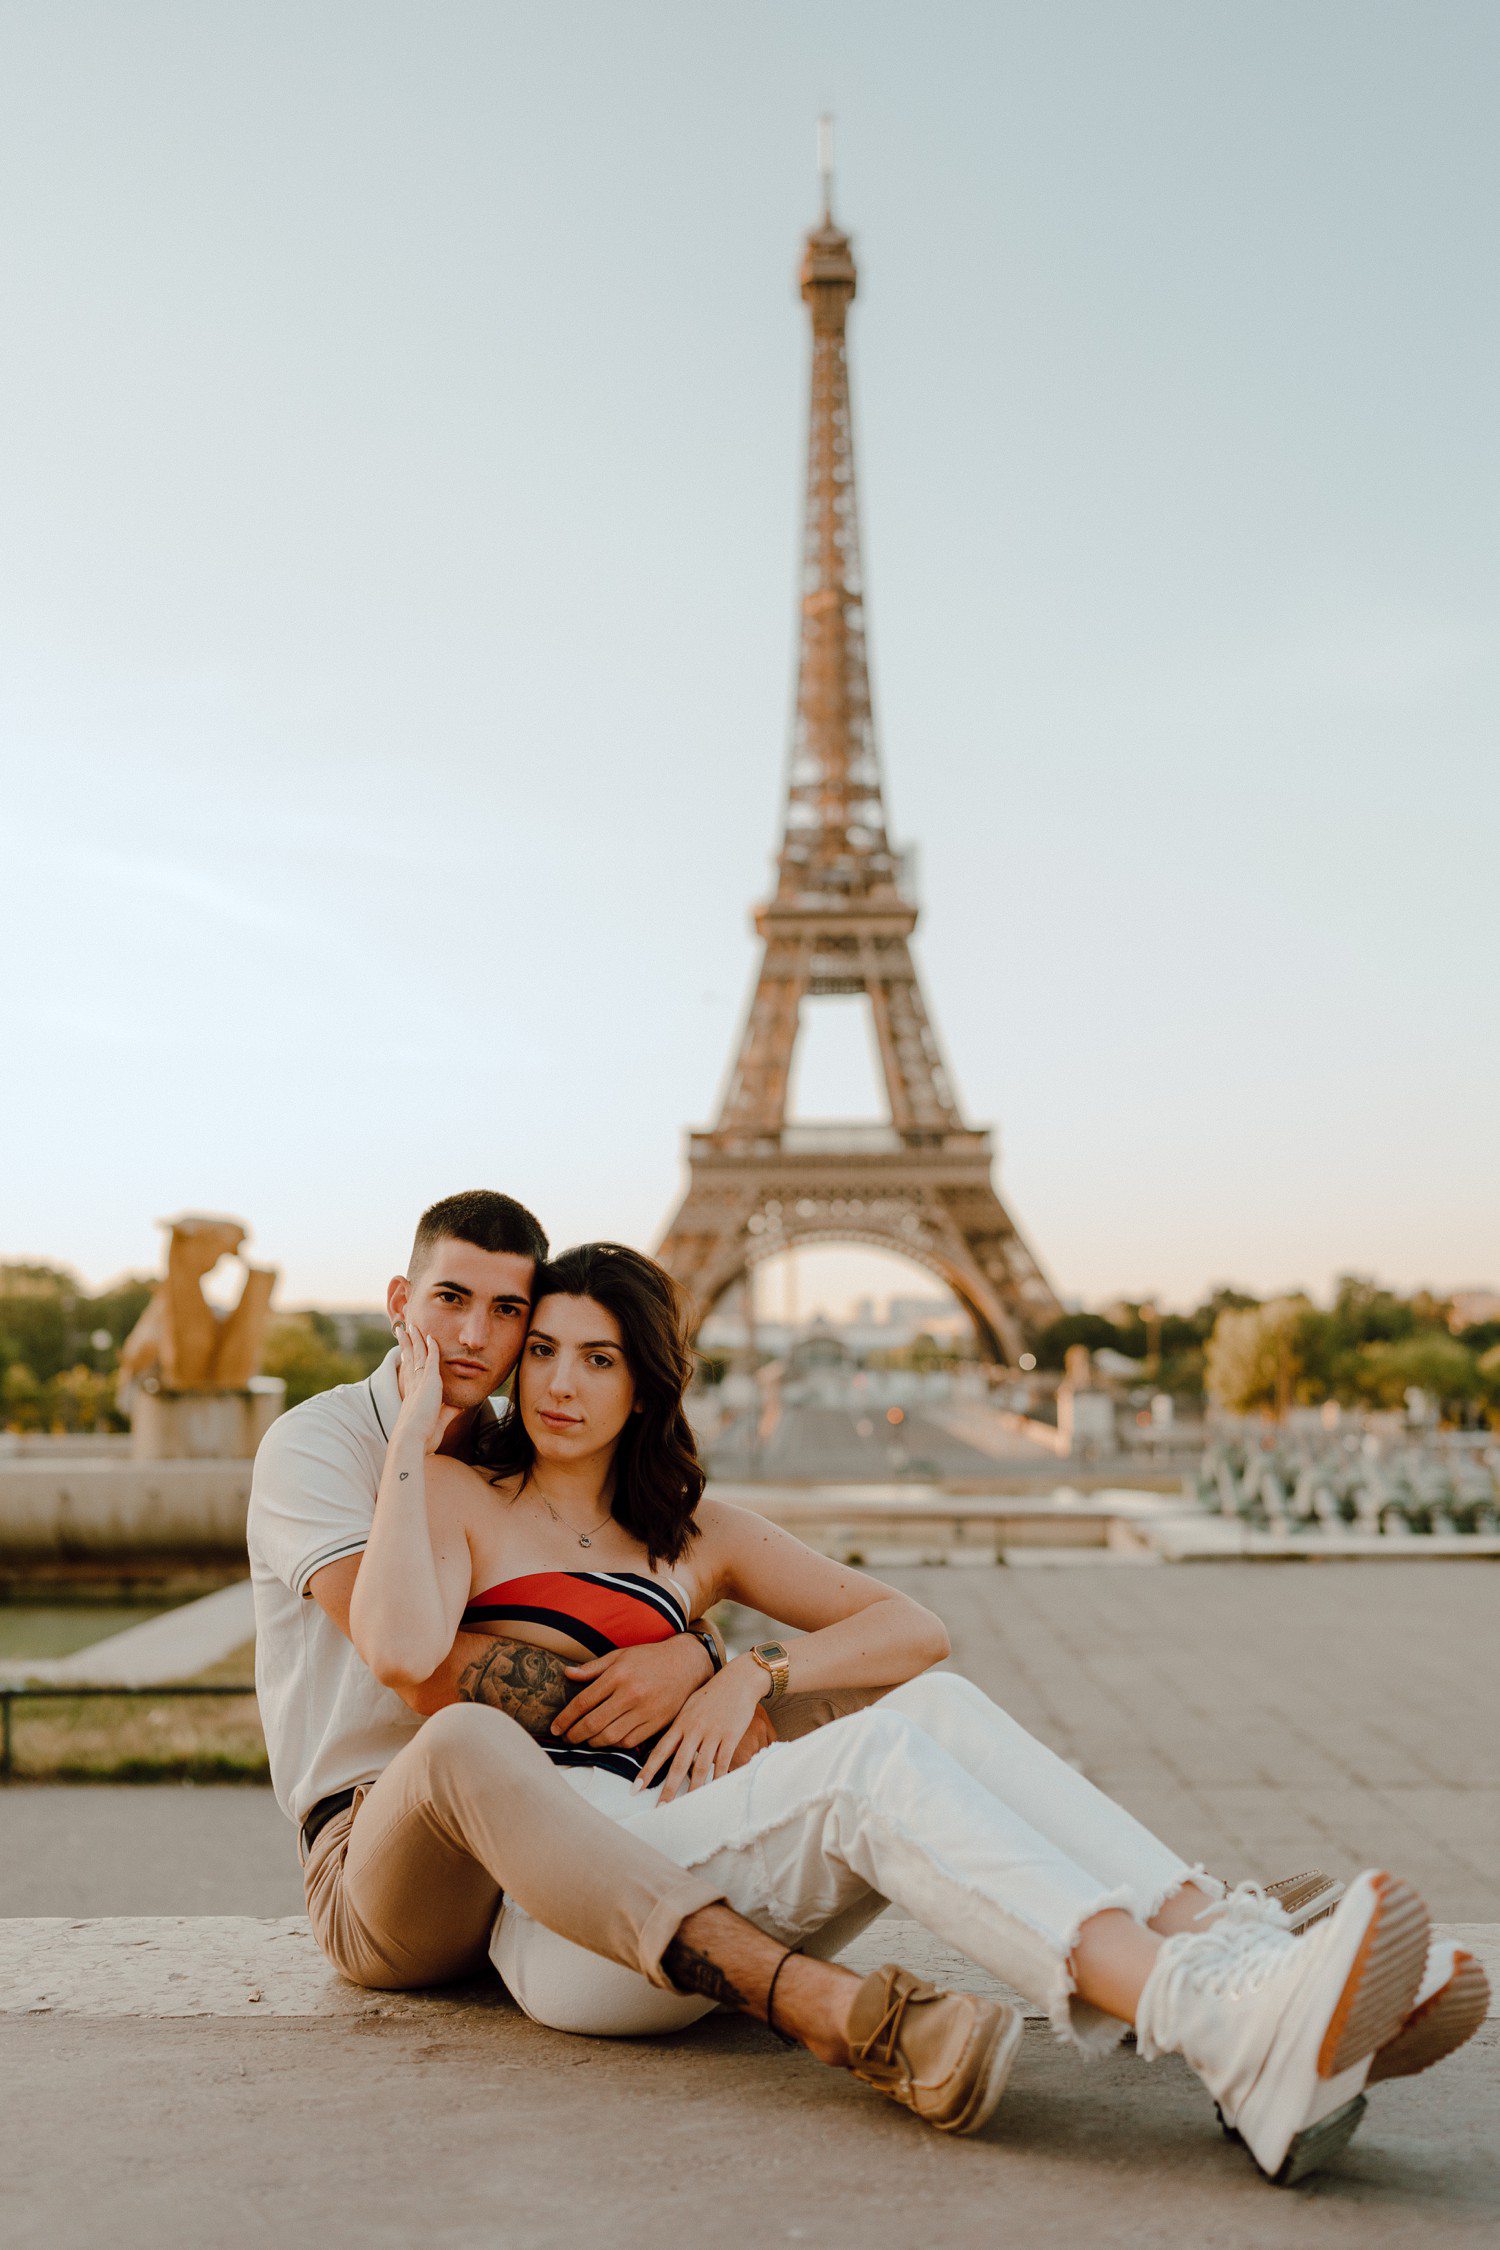 Couple Photos at the Eiffel Tower in Paris